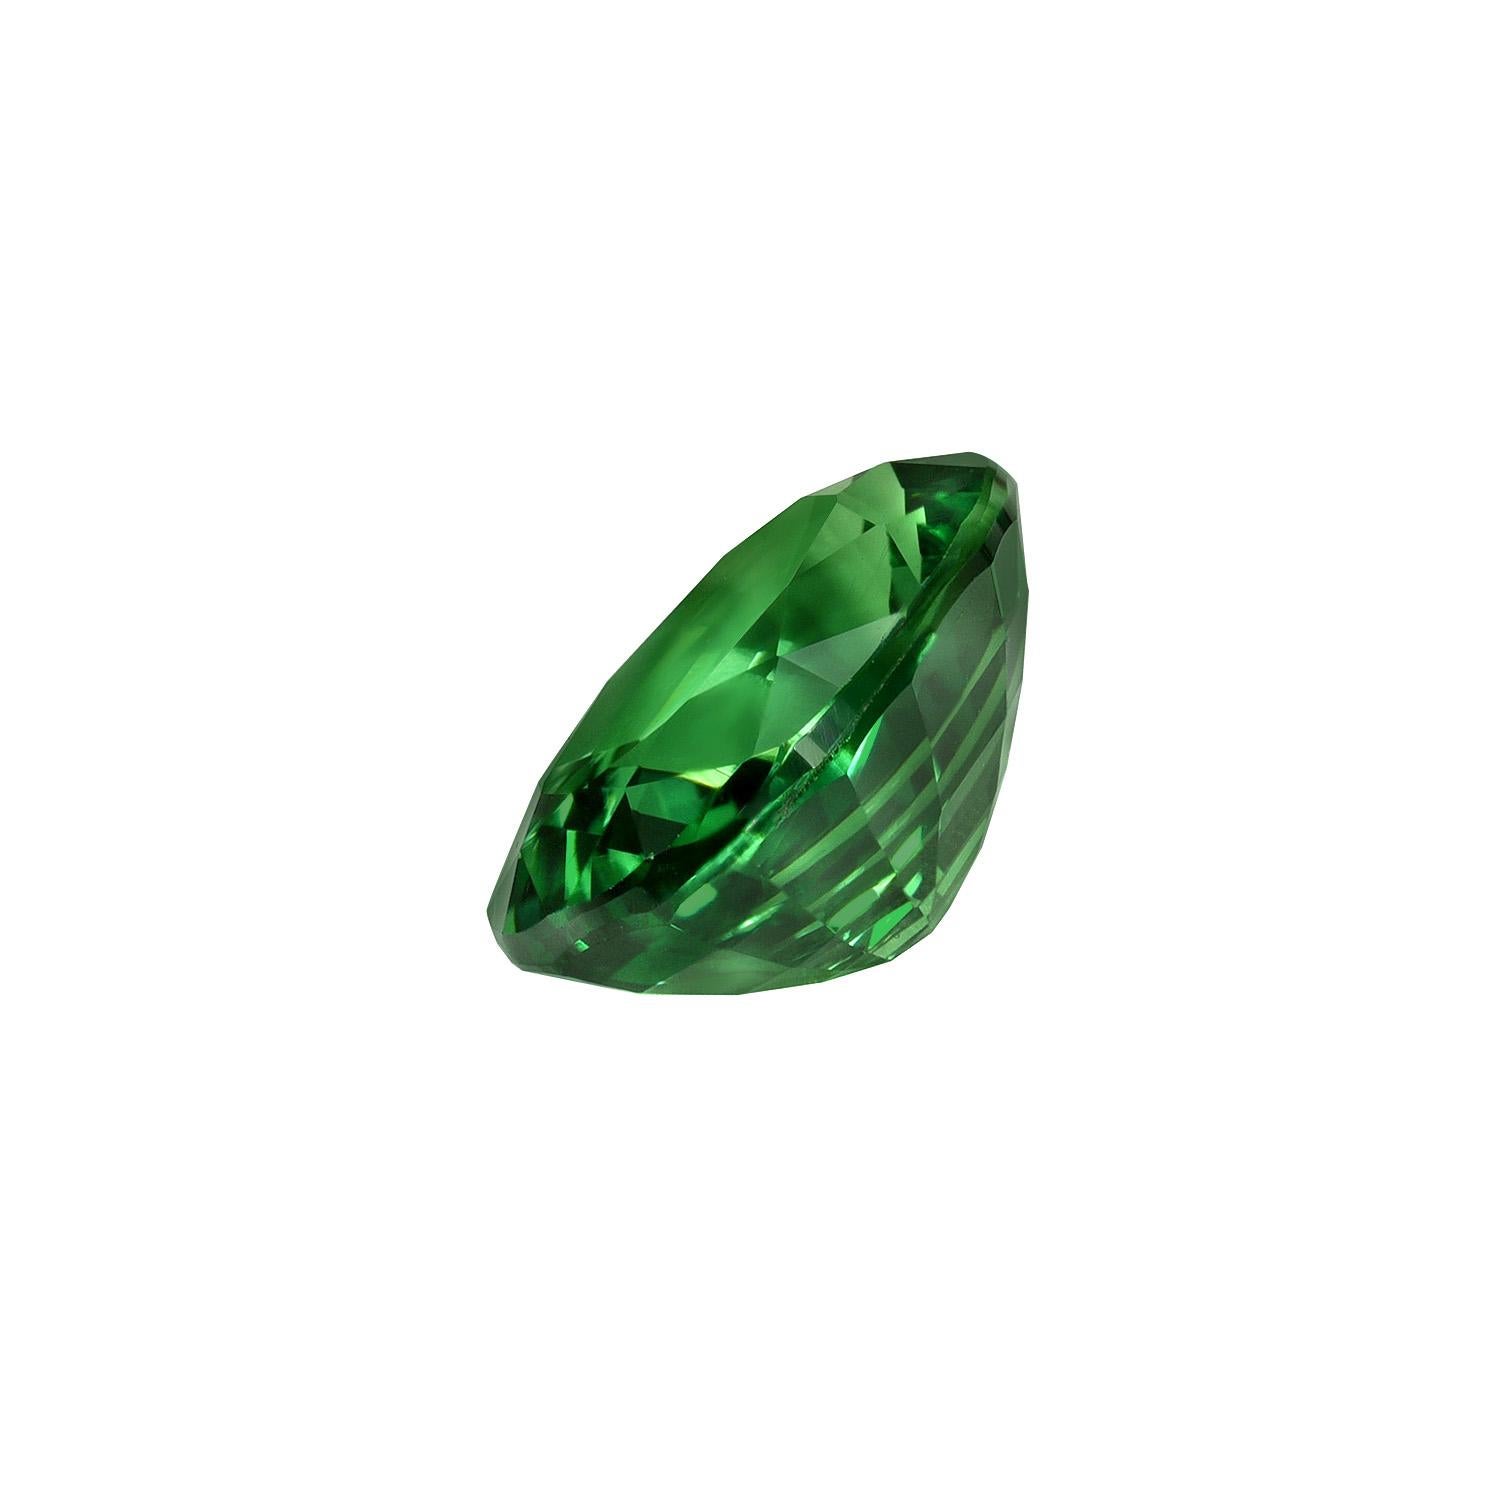 Fine Tsavorite Garnet oval gem, offered loose to a world-class gemstone lover.
Returns are accepted and paid by us within 7 days of delivery.
We offer supreme custom jewelry work upon request. Please contact us for more details.
For your convenience